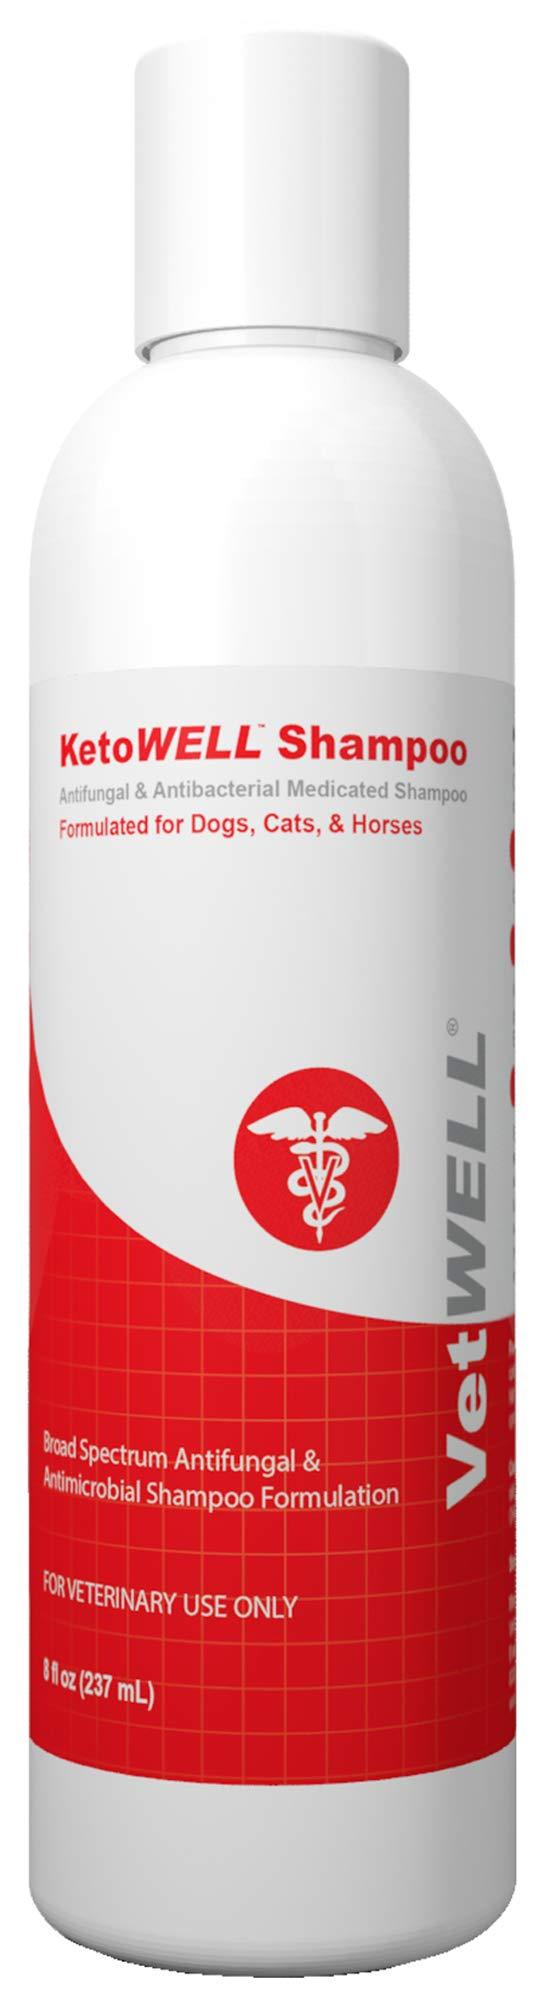 [Australia] - KetoWELL Ketoconazole & Chlorhexidine Shampoo for Dogs & Cats - Antifungal, Antibacterial & Antiseptic Medicated Dog Shampoo for Hot Spots, Ringworm, Yeast, Fungal Infections, Acne & Pyoderma 8 Ounce 